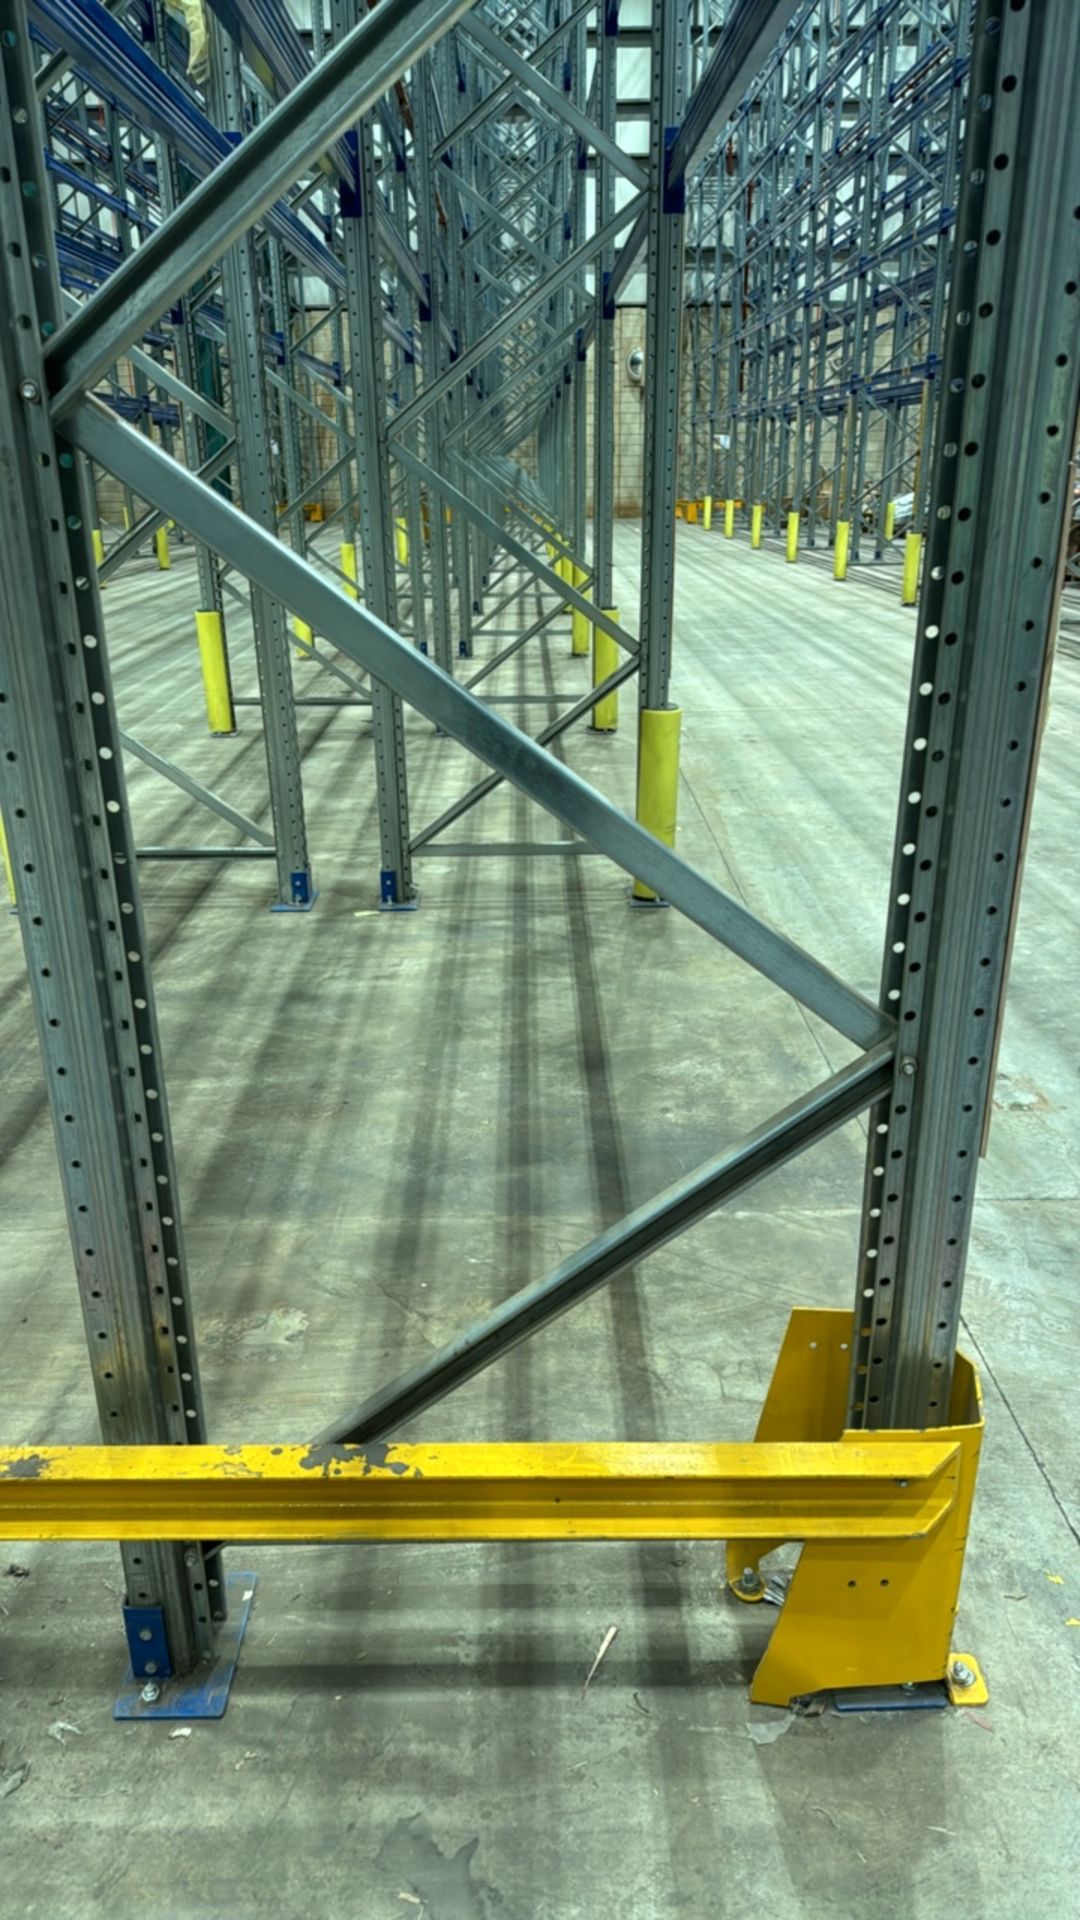 Run Of 22 Bays Of Back To Back Bolt-less Pallet Racking - Image 7 of 10